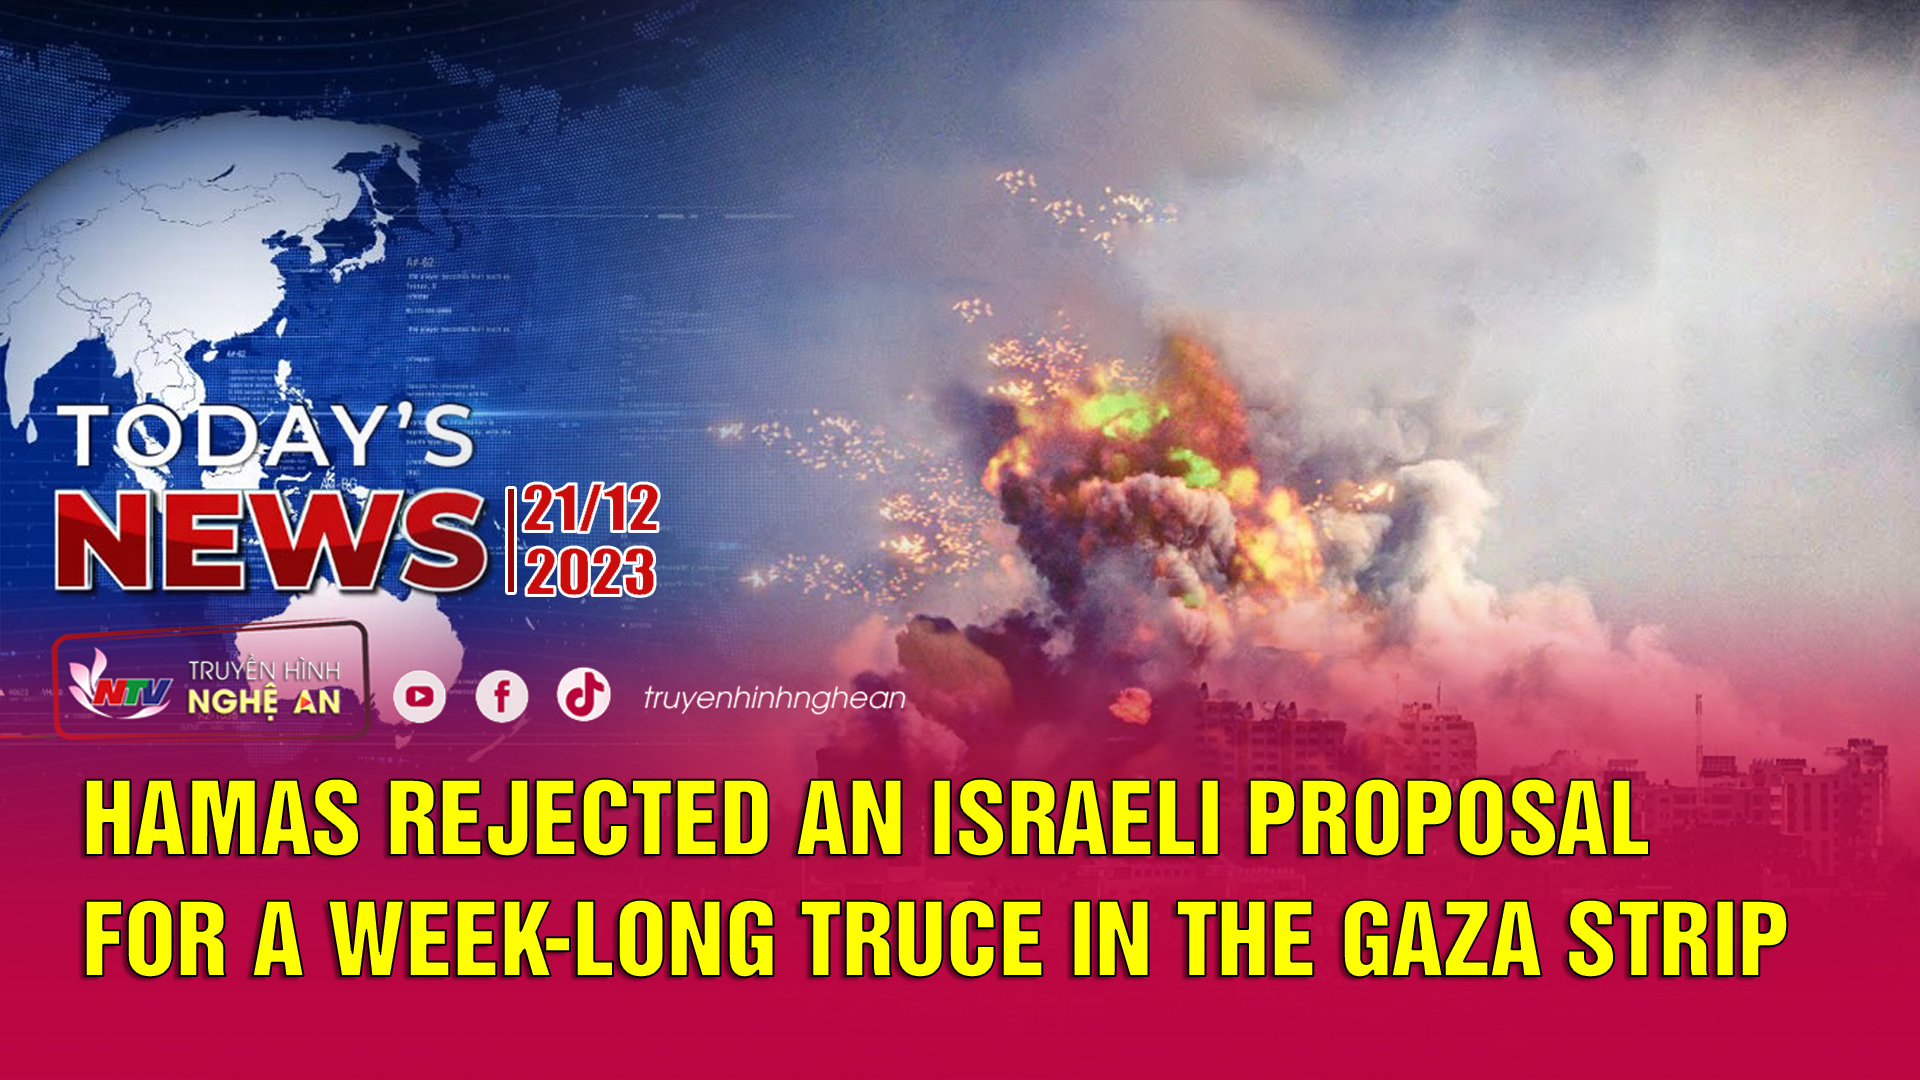 Today's News - 21/12/2023: Hamas rejected an Israeli proposal for a week-long truce in the Gaza Strip